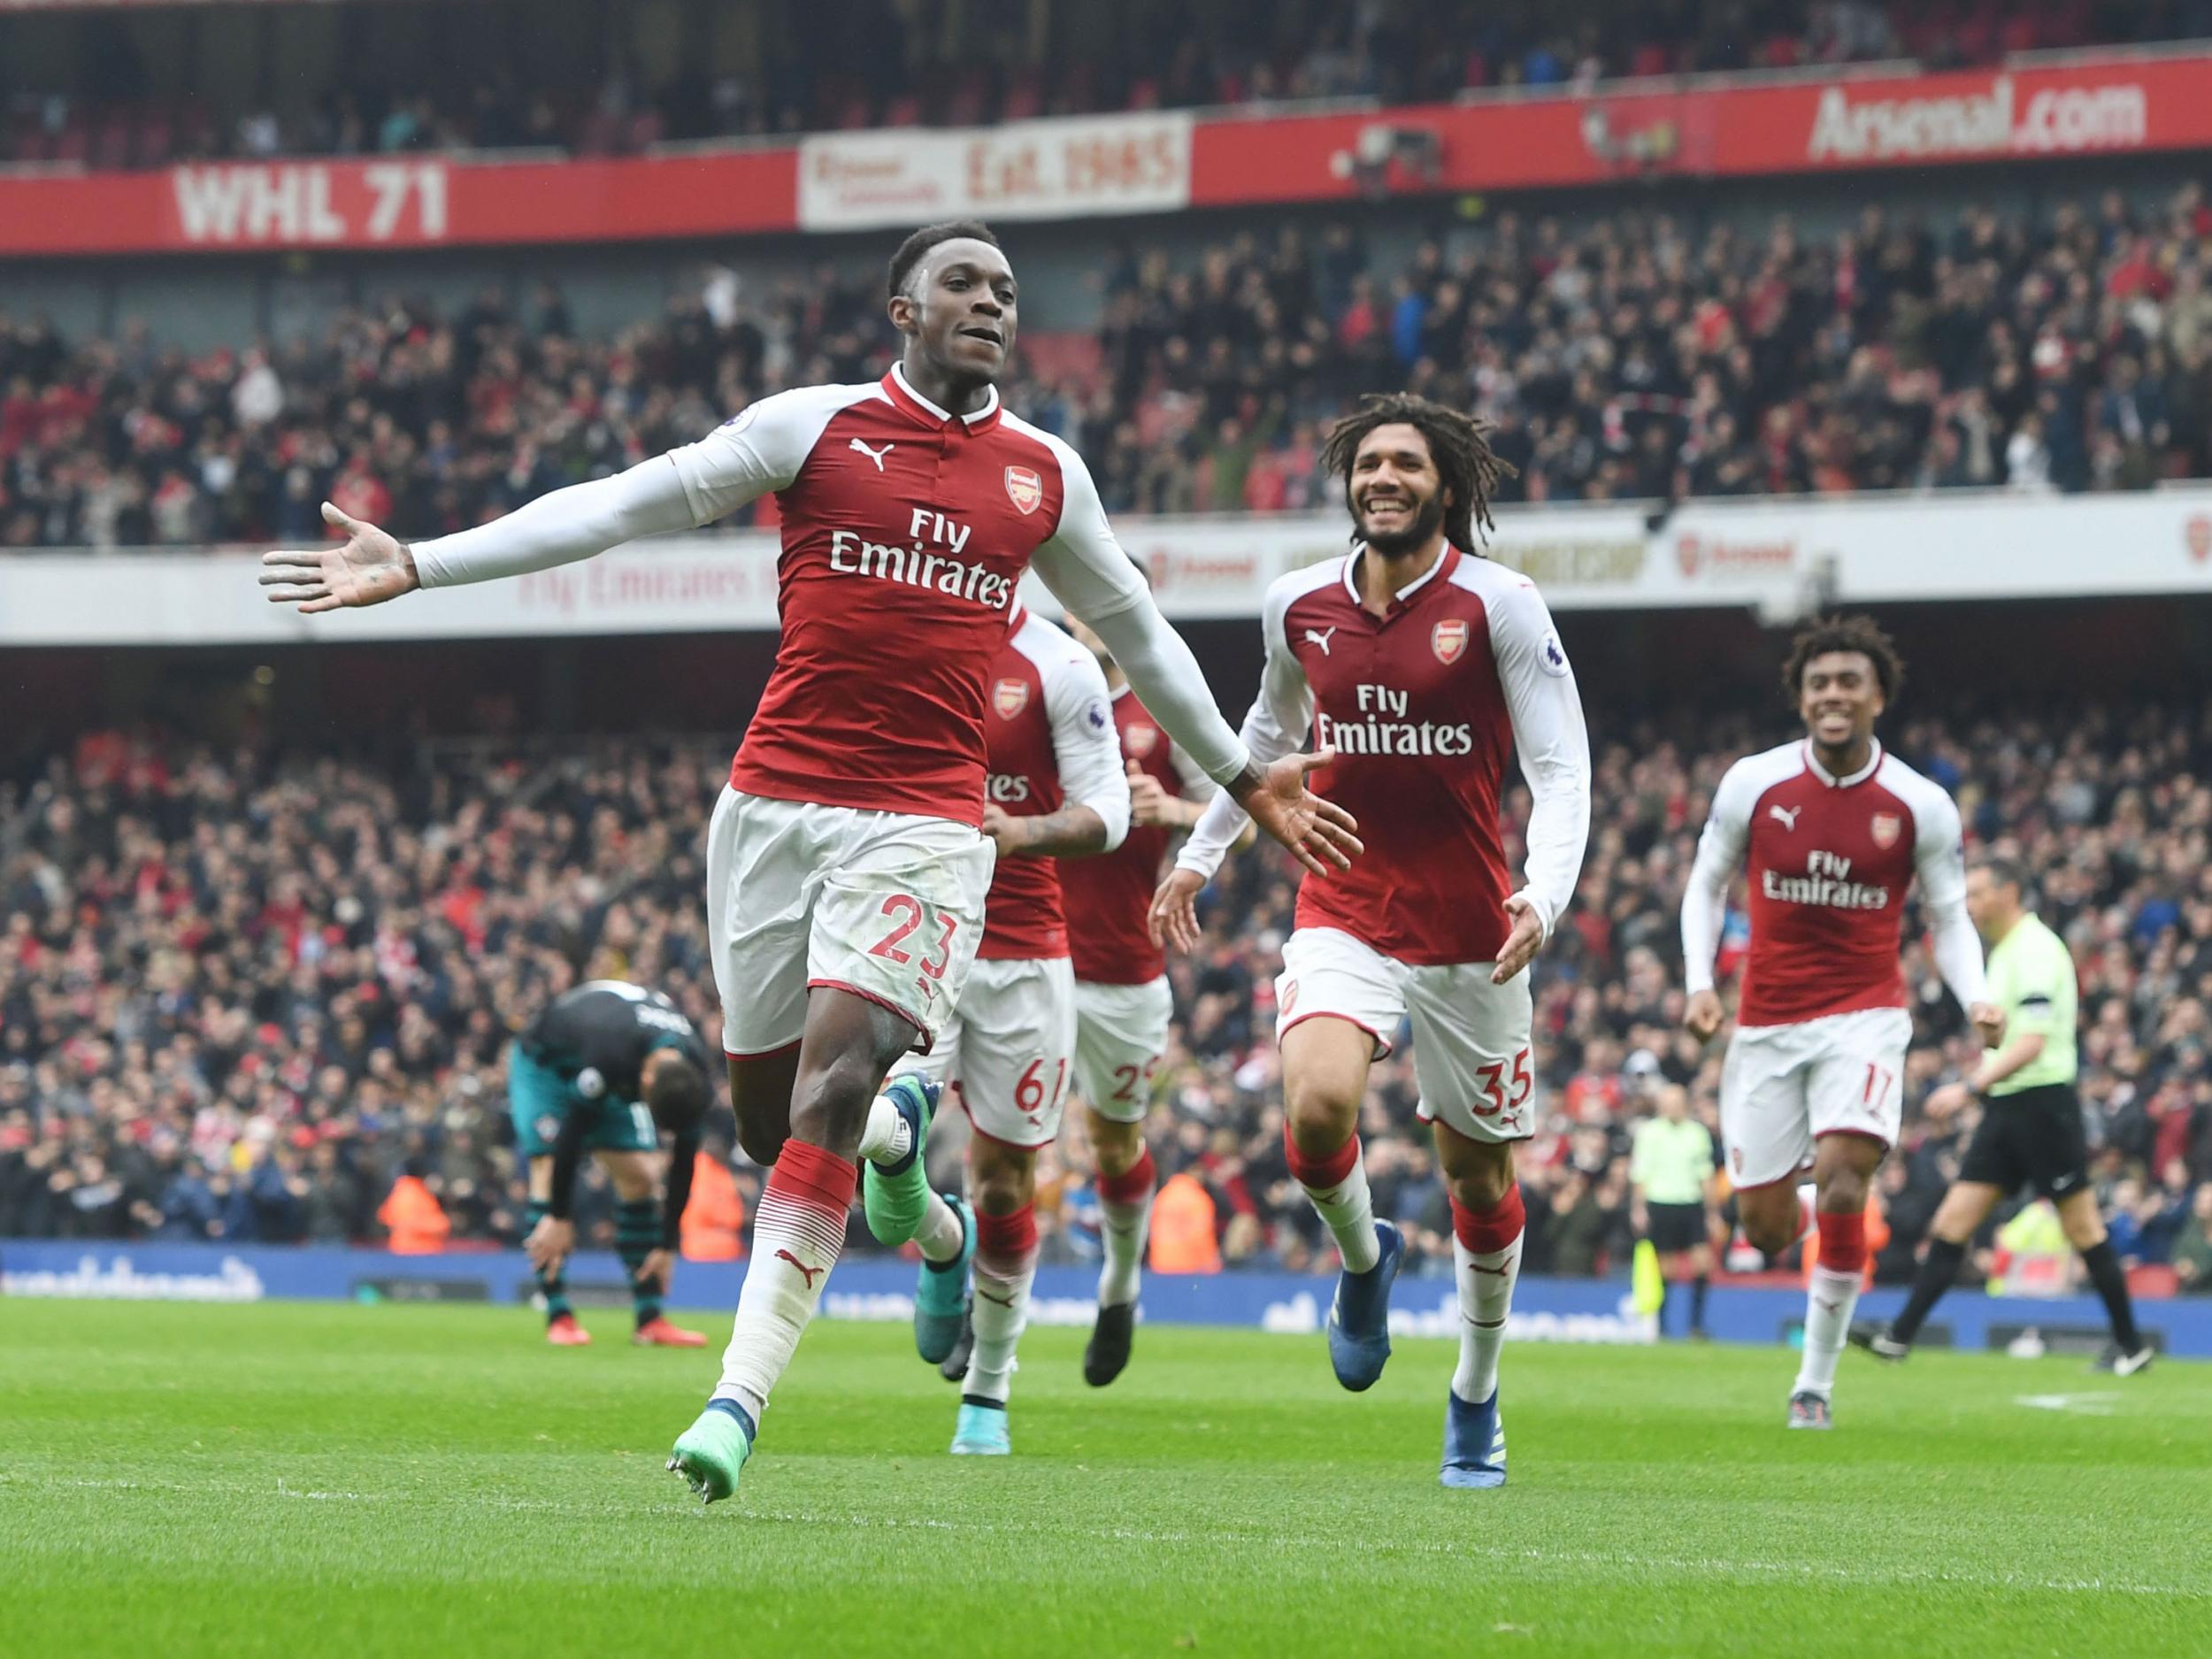 Danny Welbeck inspired Arsenal against Southampton and maybe offered a pointer to the future